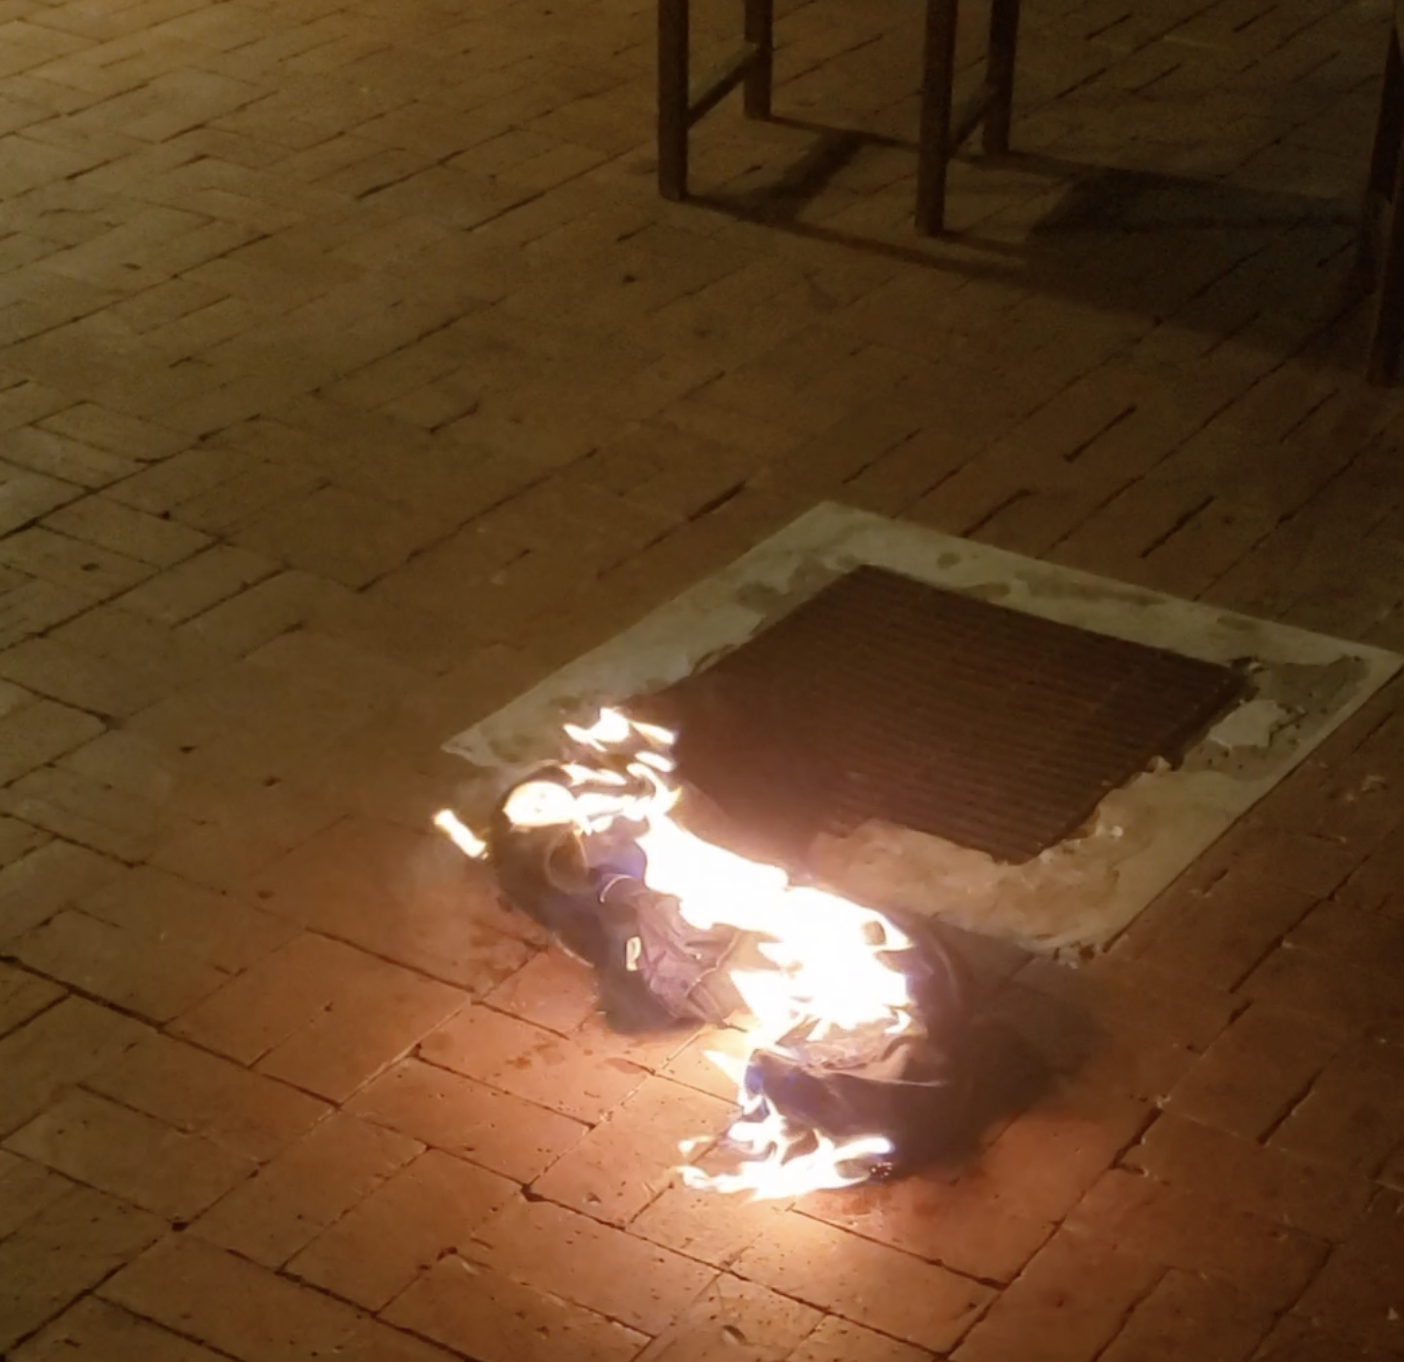 We Set Fire to a Pair of Pants. We Put Out the Fire. We Cleaned It Up. They Kicked Us Out of Campus Housing.